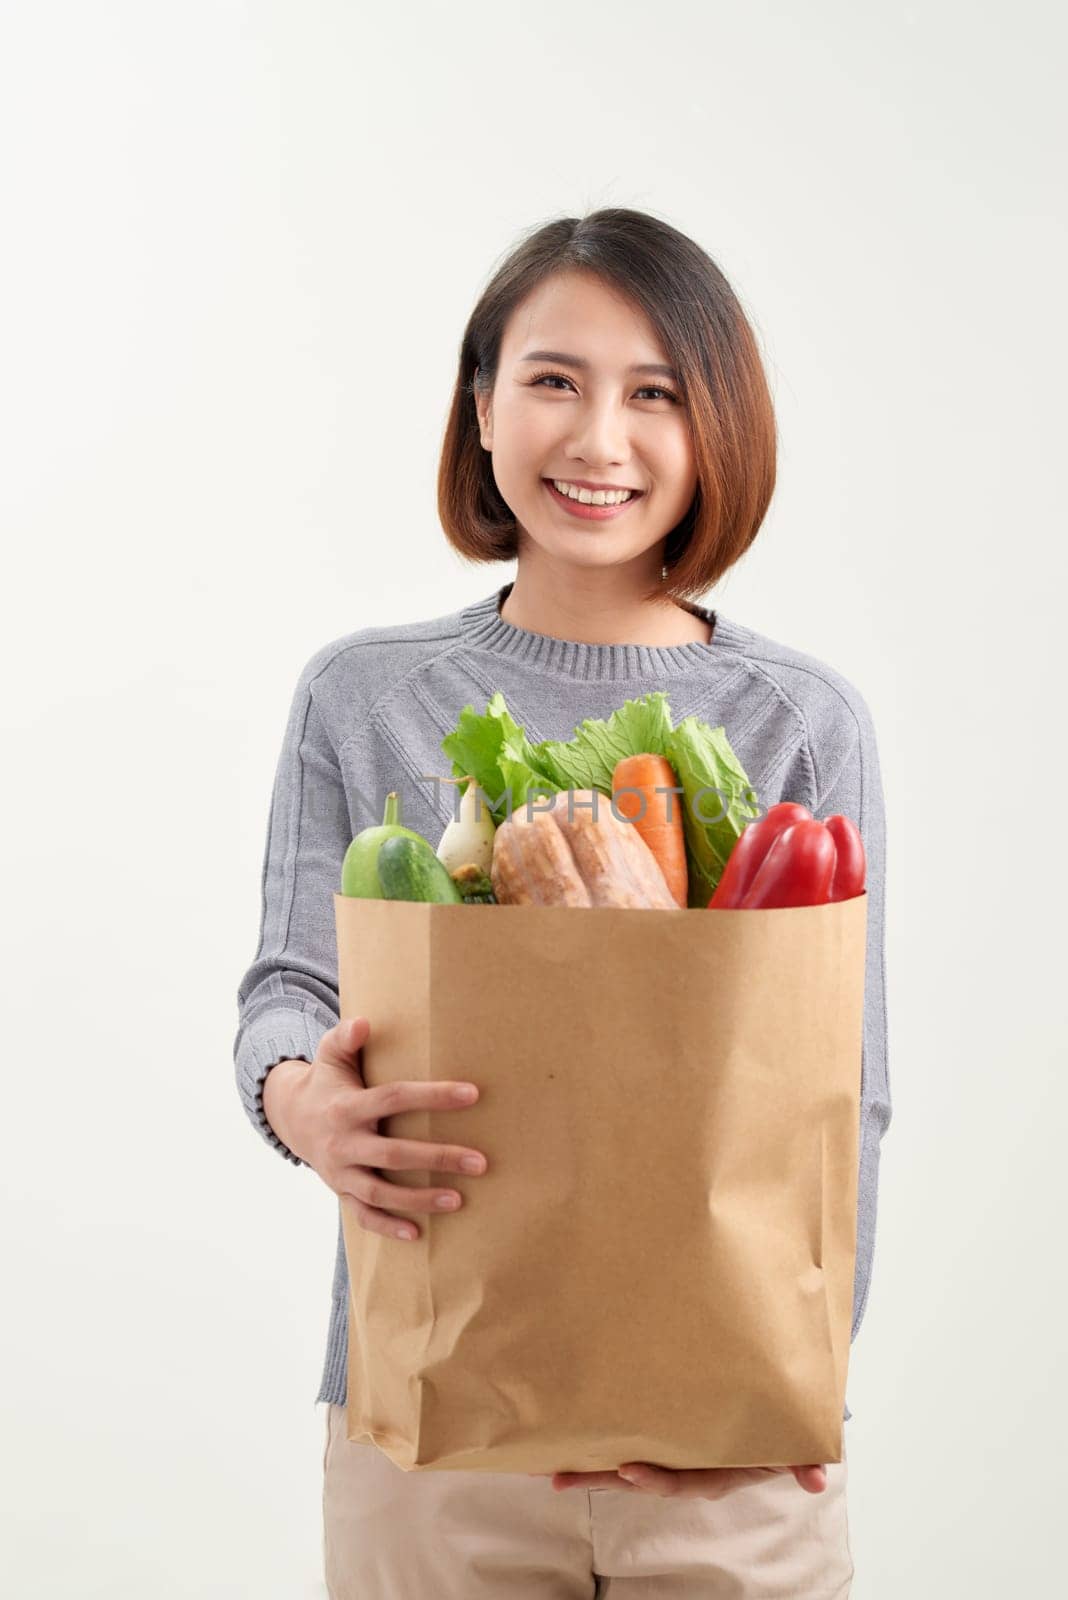 Cheerful woman holding a shopping bag full of groceries by makidotvn